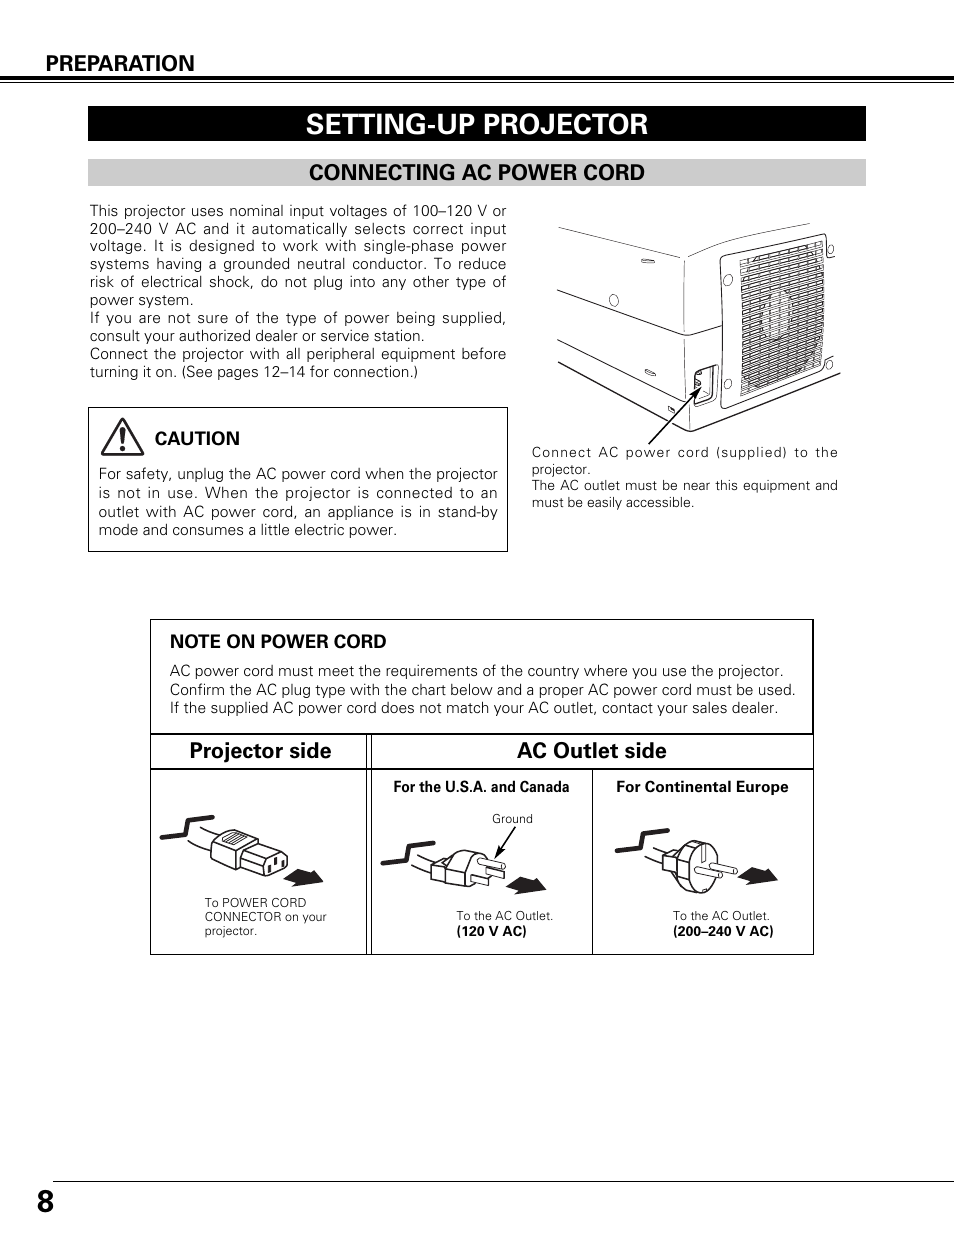 Setting-up projector, Connecting ac power cord, Preparation | Projector side ac outlet side | Canon LV-7575 User Manual | Page 8 / 63